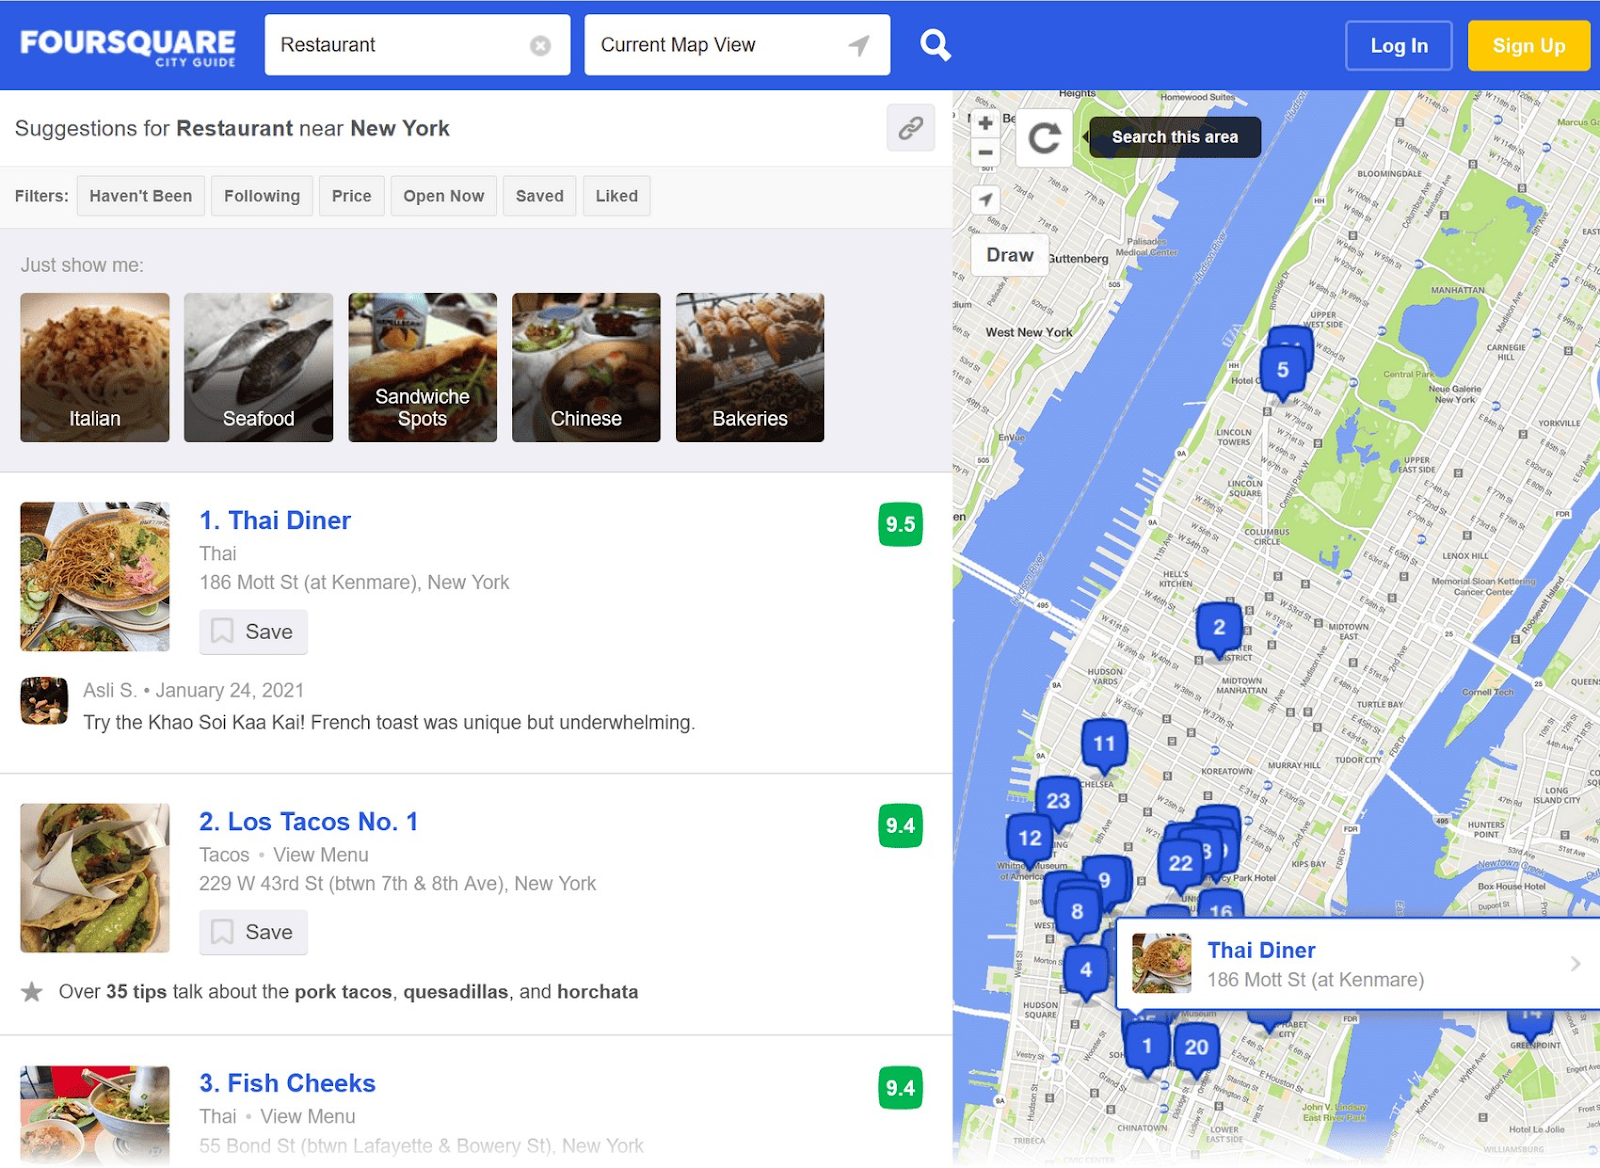 Foursquare's results listing restaurants on the left and showing them on the map on the right-hand side